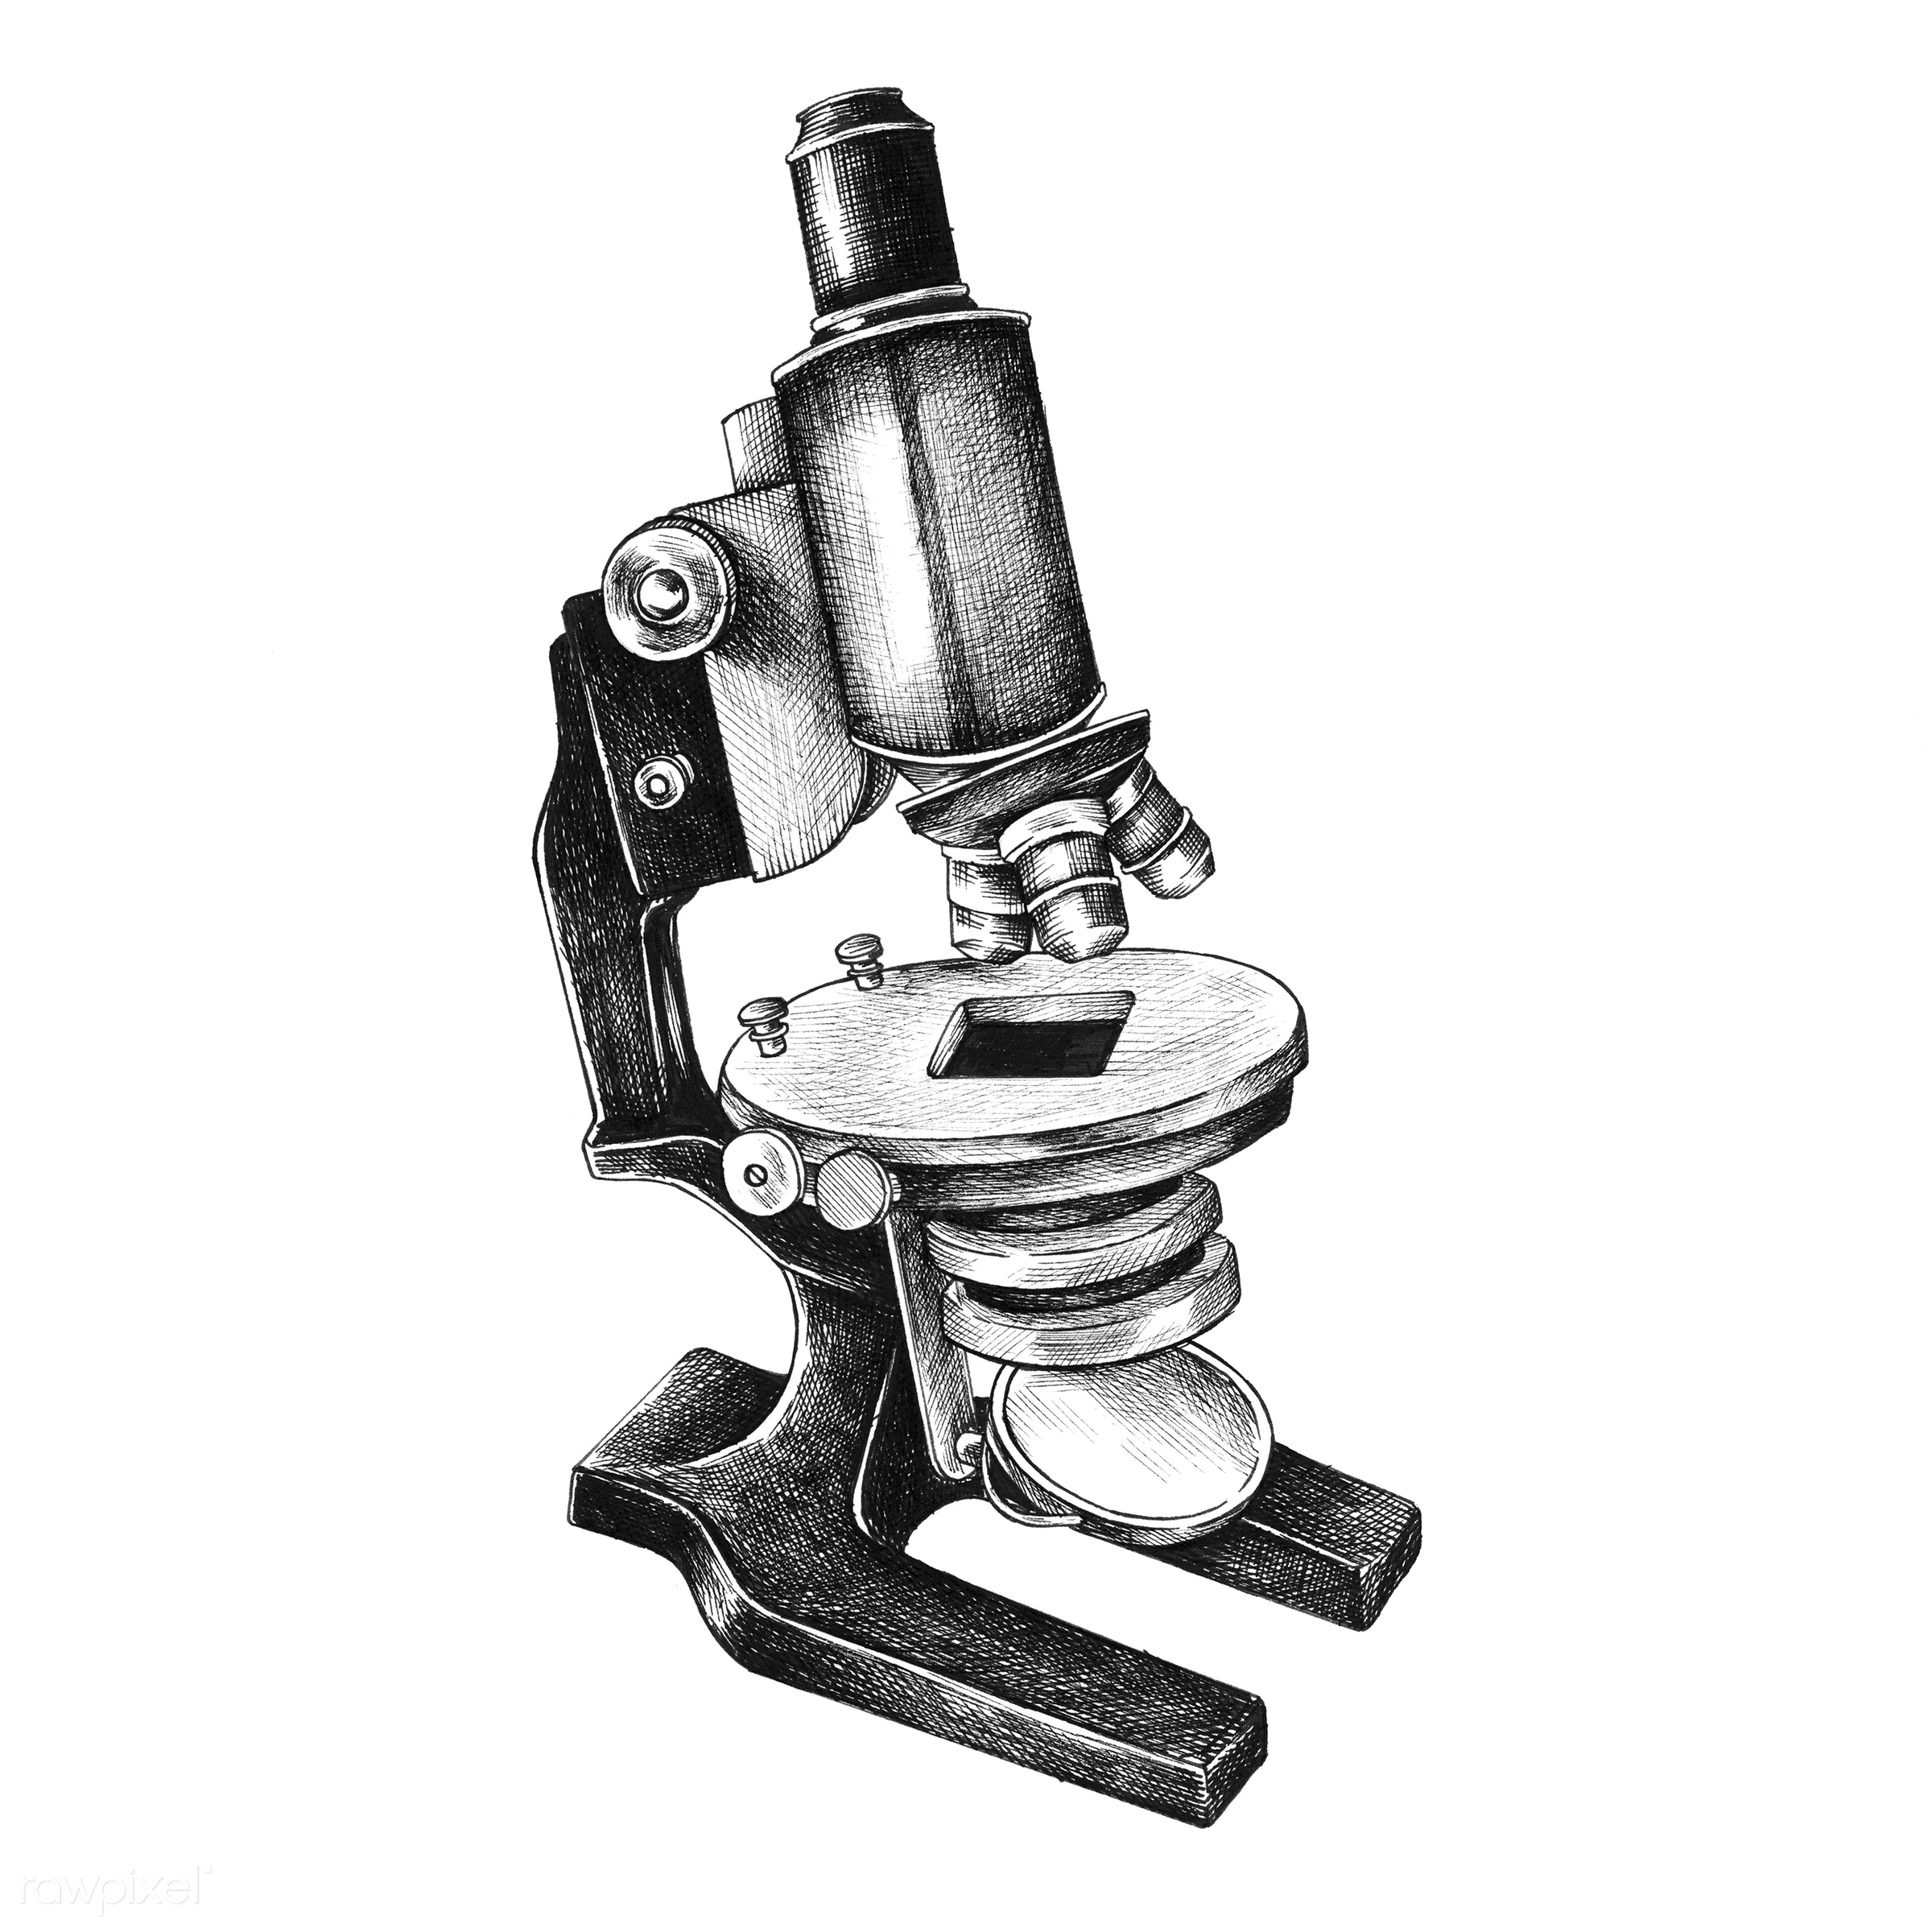 Compound Microscope Drawing | Free download on ClipArtMag